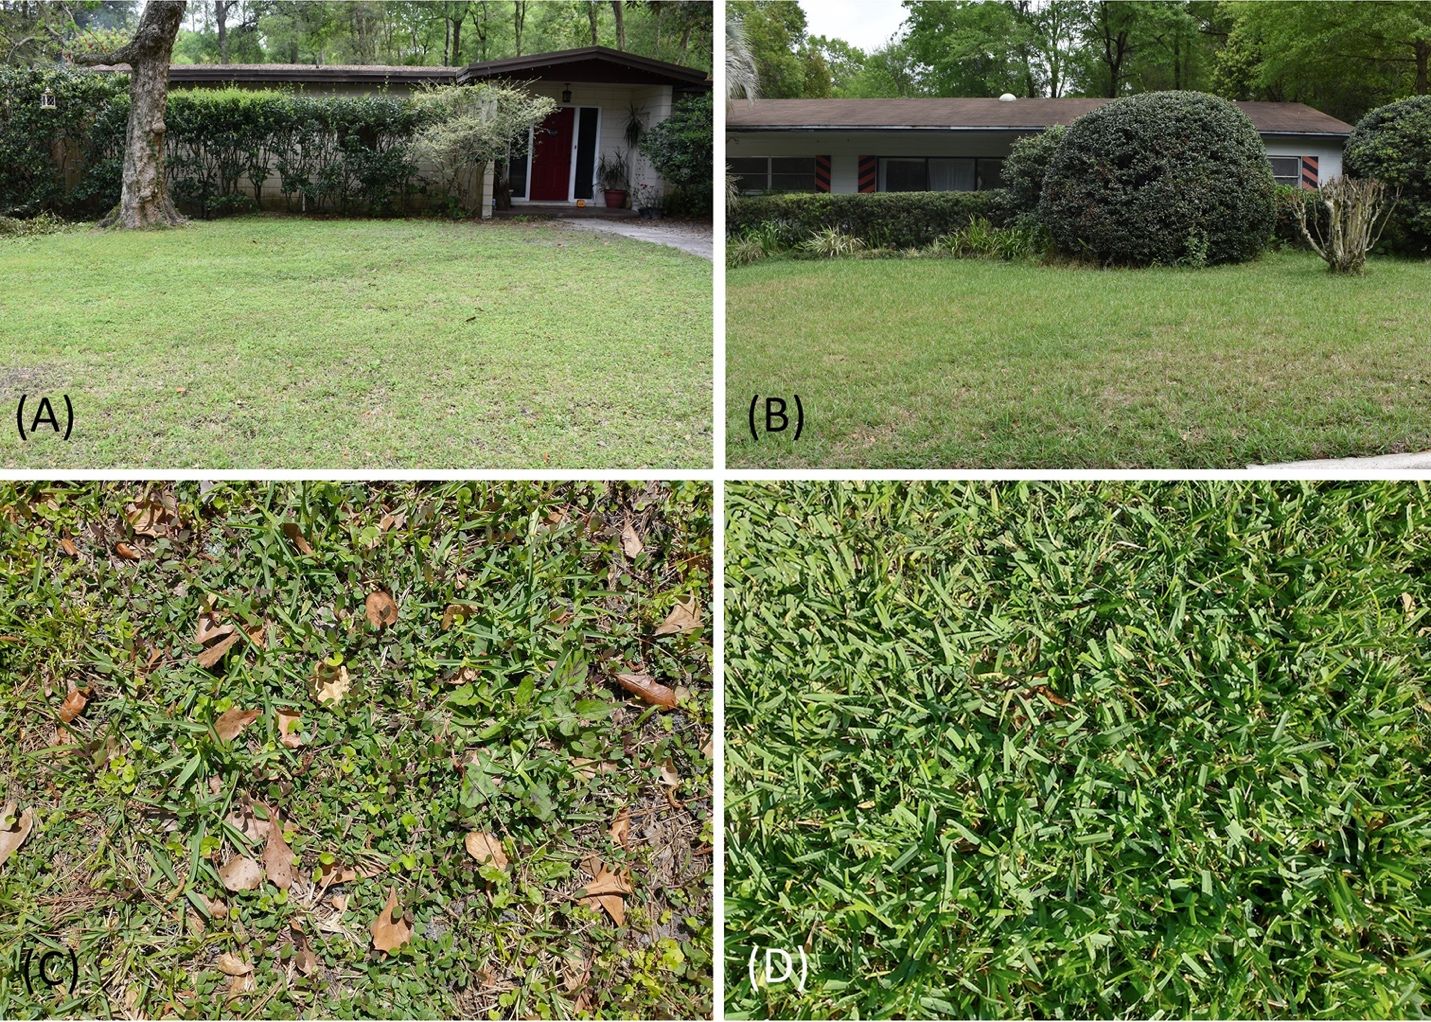 Note the similarities in the way these lawns look. Lawns with more plant diversity can also be aesthetically pleasing. Curbside perspectives showing similar aesthetic qualities in two lawns, (A) one with more plant diversity and (B) one predominately composed of some cultivar of St. Augustinegrass. It is only when you look closely that you see a difference between (C) the lawn with more plant diversity and (D) the lawn composed primarily of St. Augustinegrass.